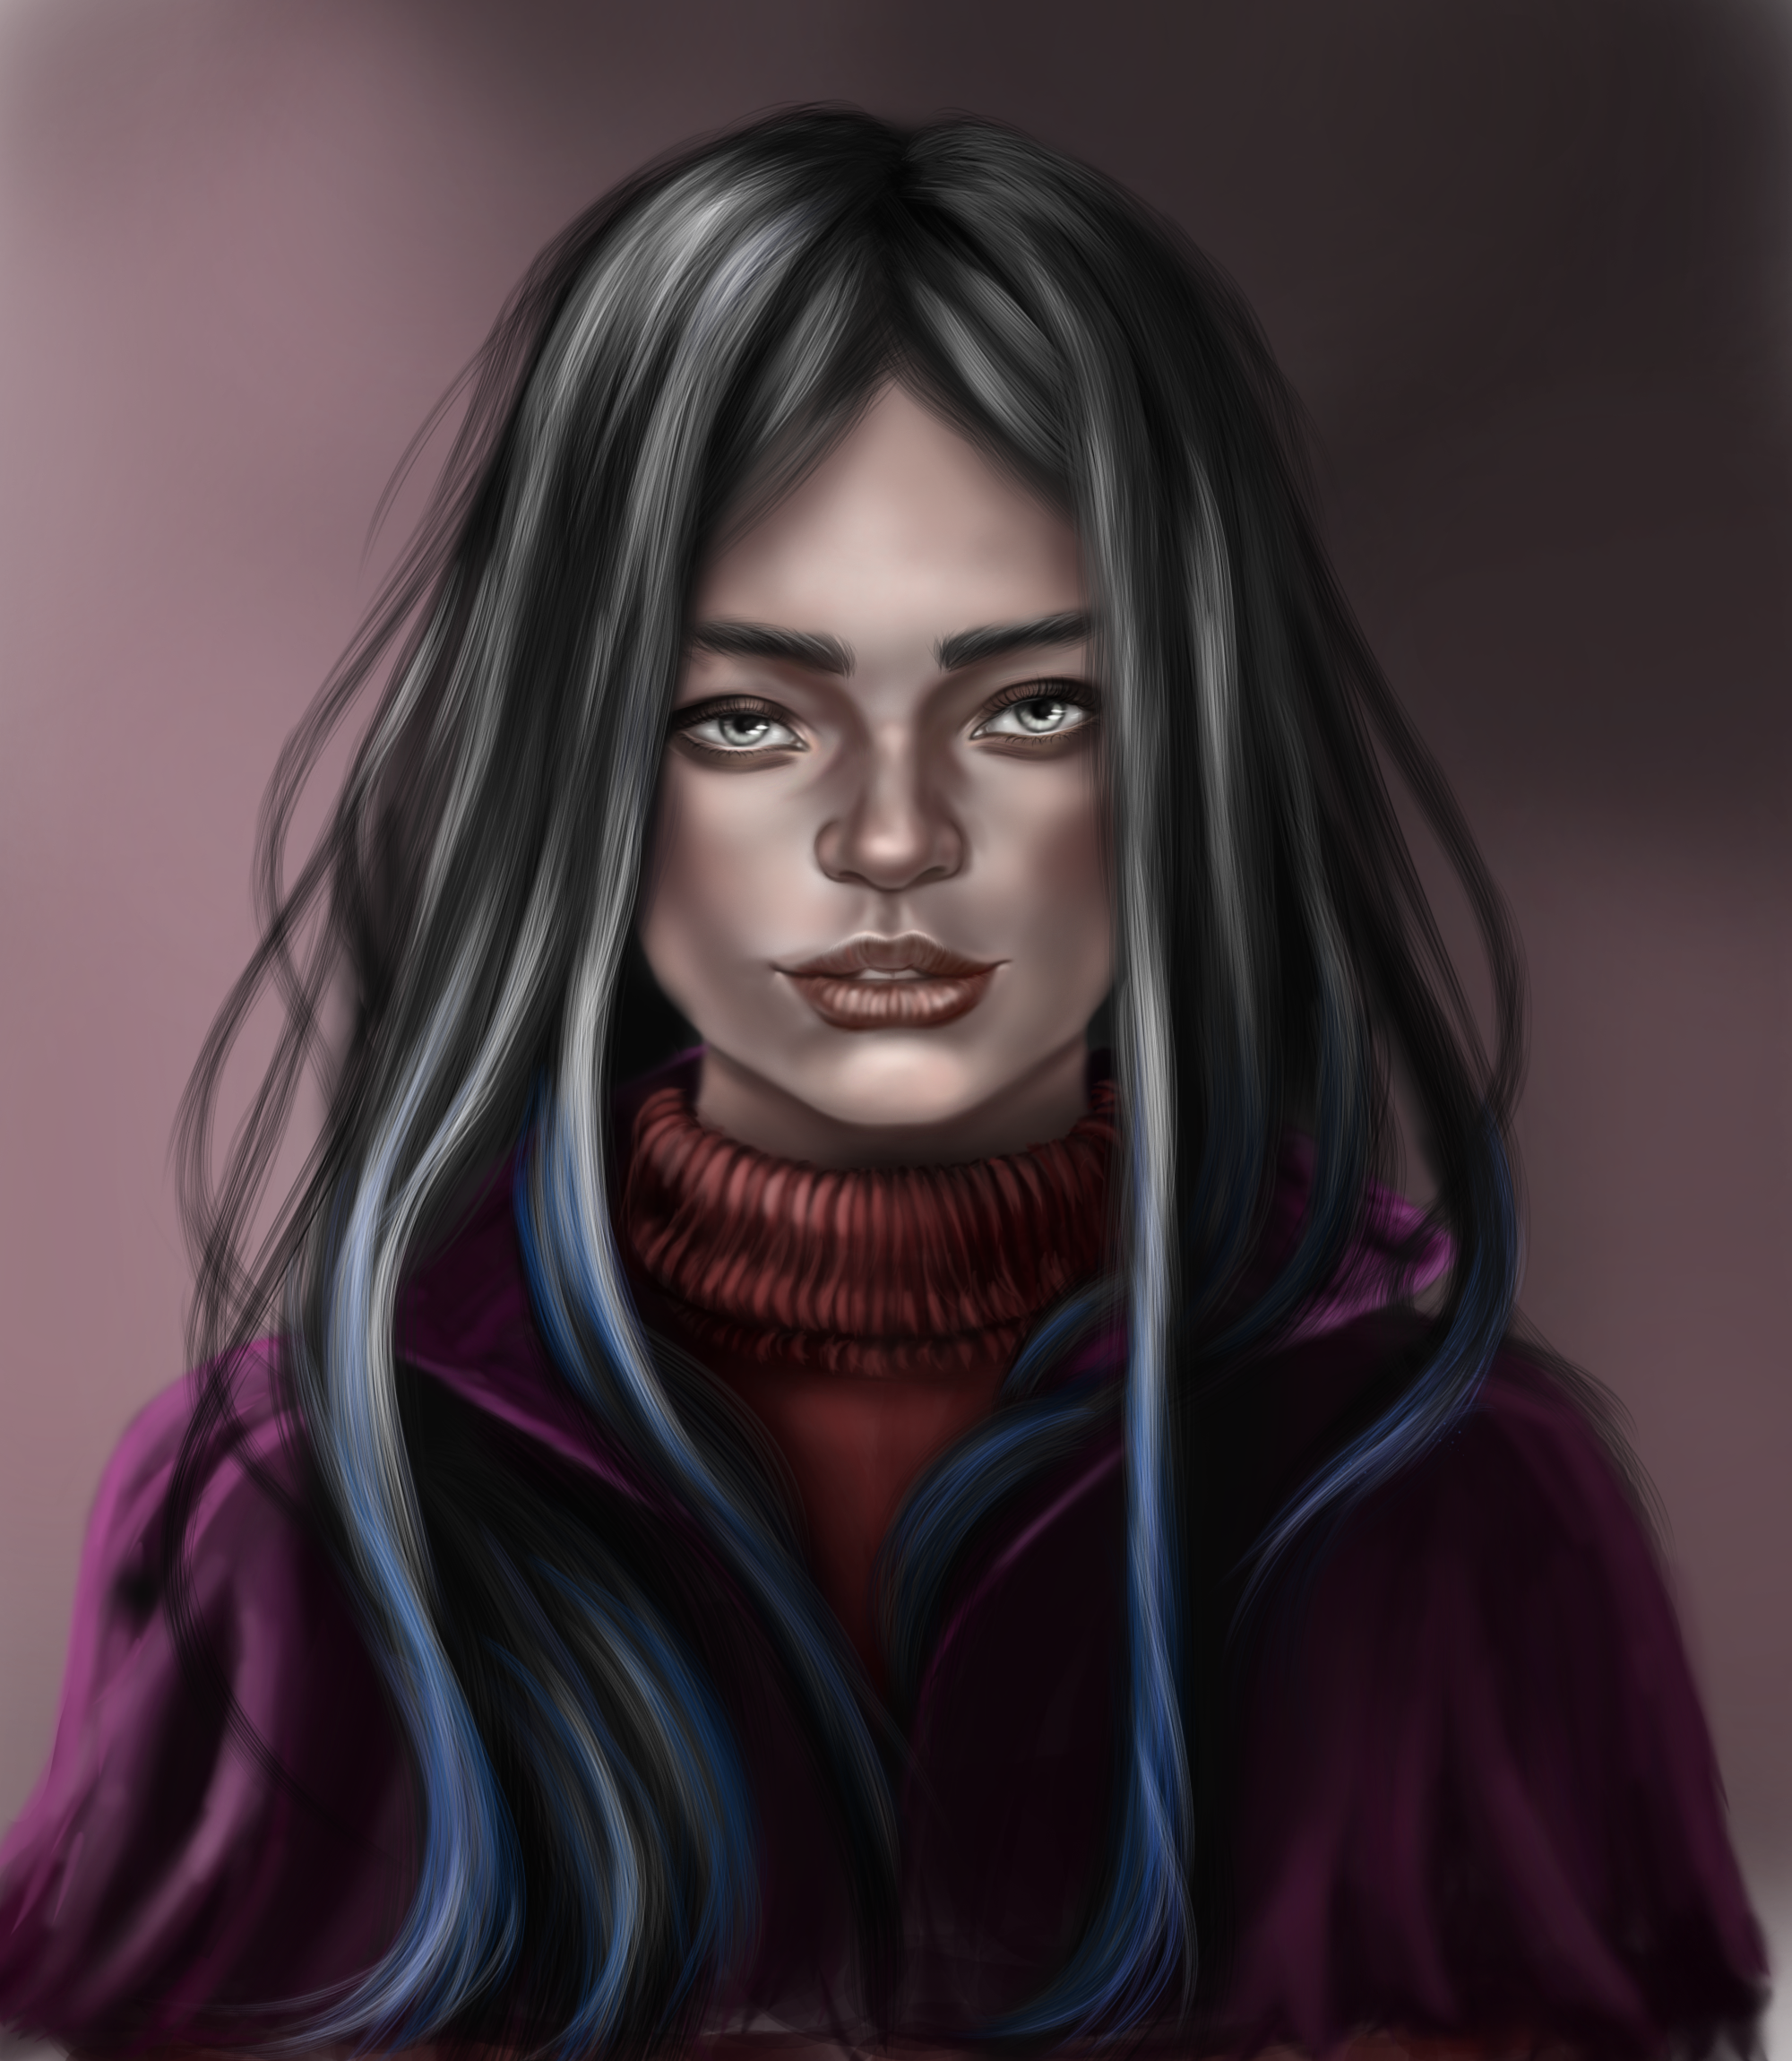 Francisftlp-Digital Drawing She Mysterious- Step 5.png